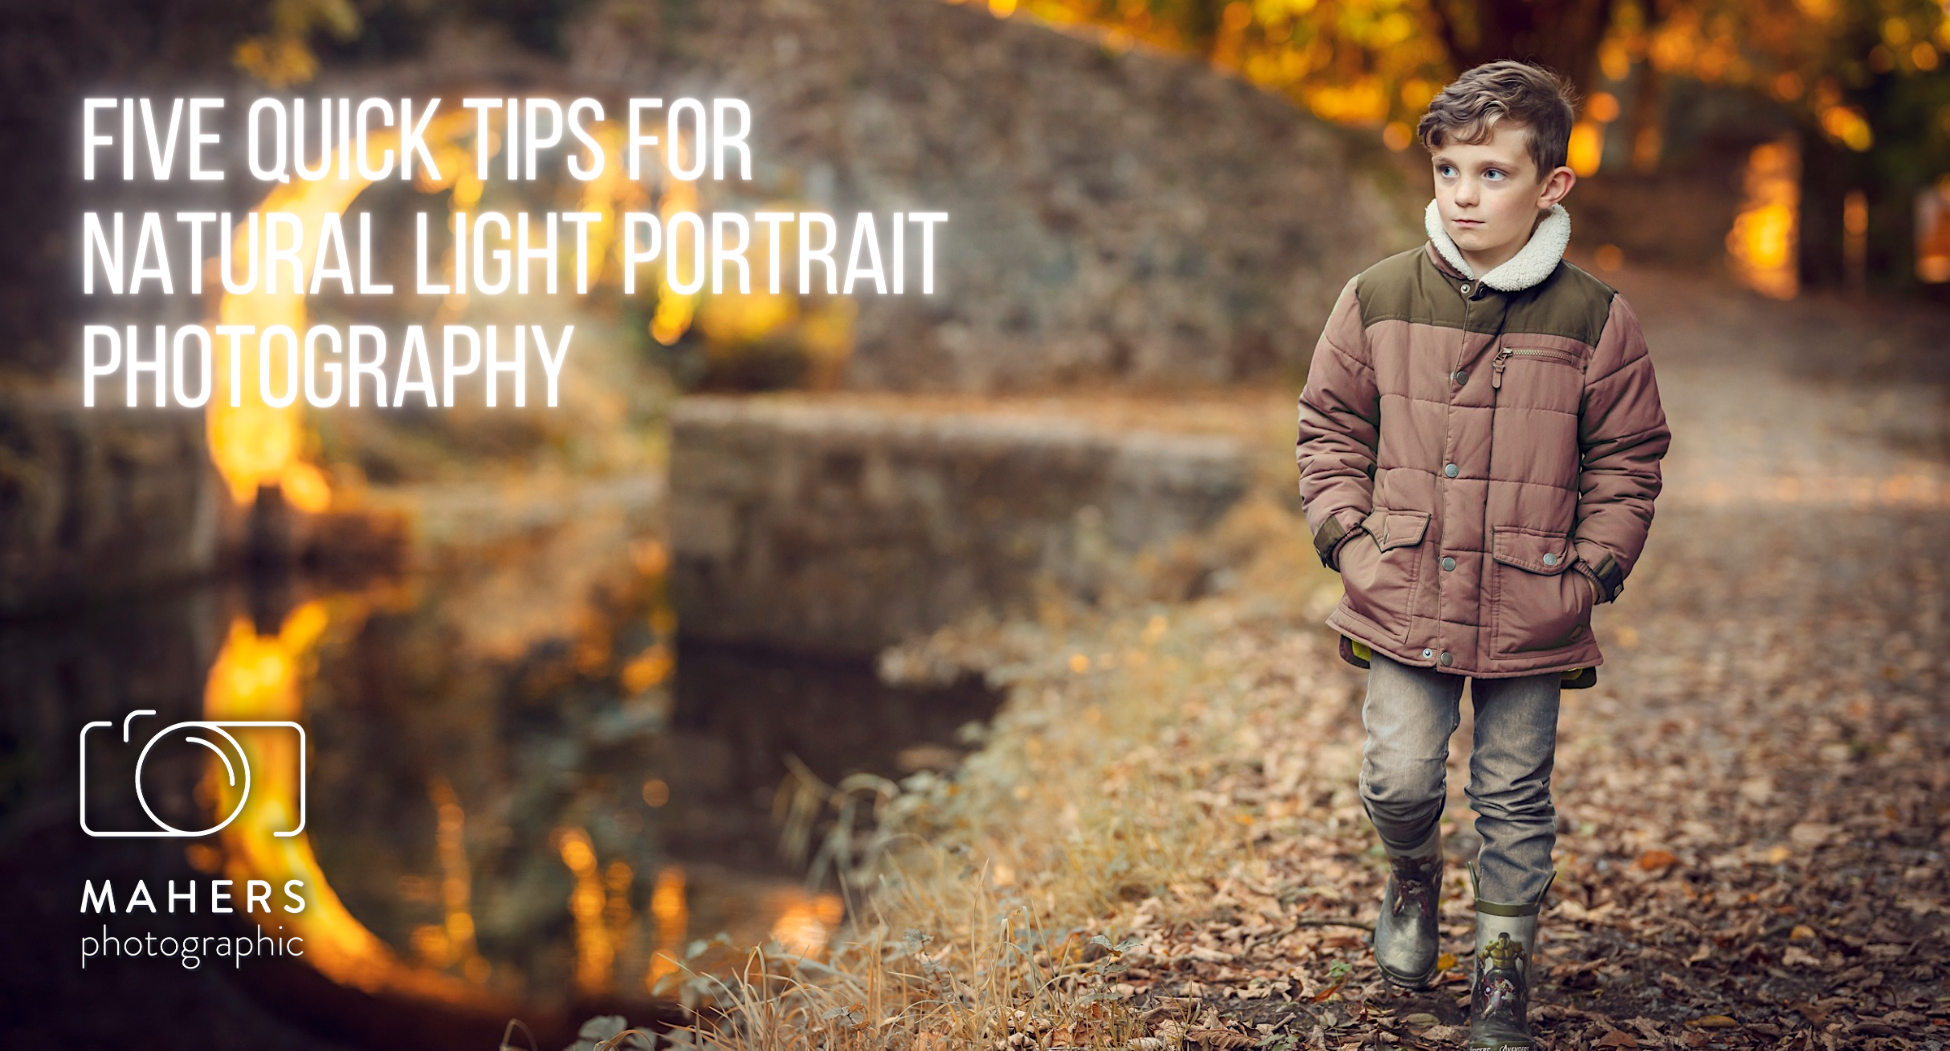 Five quick tips for natural light portrait photography